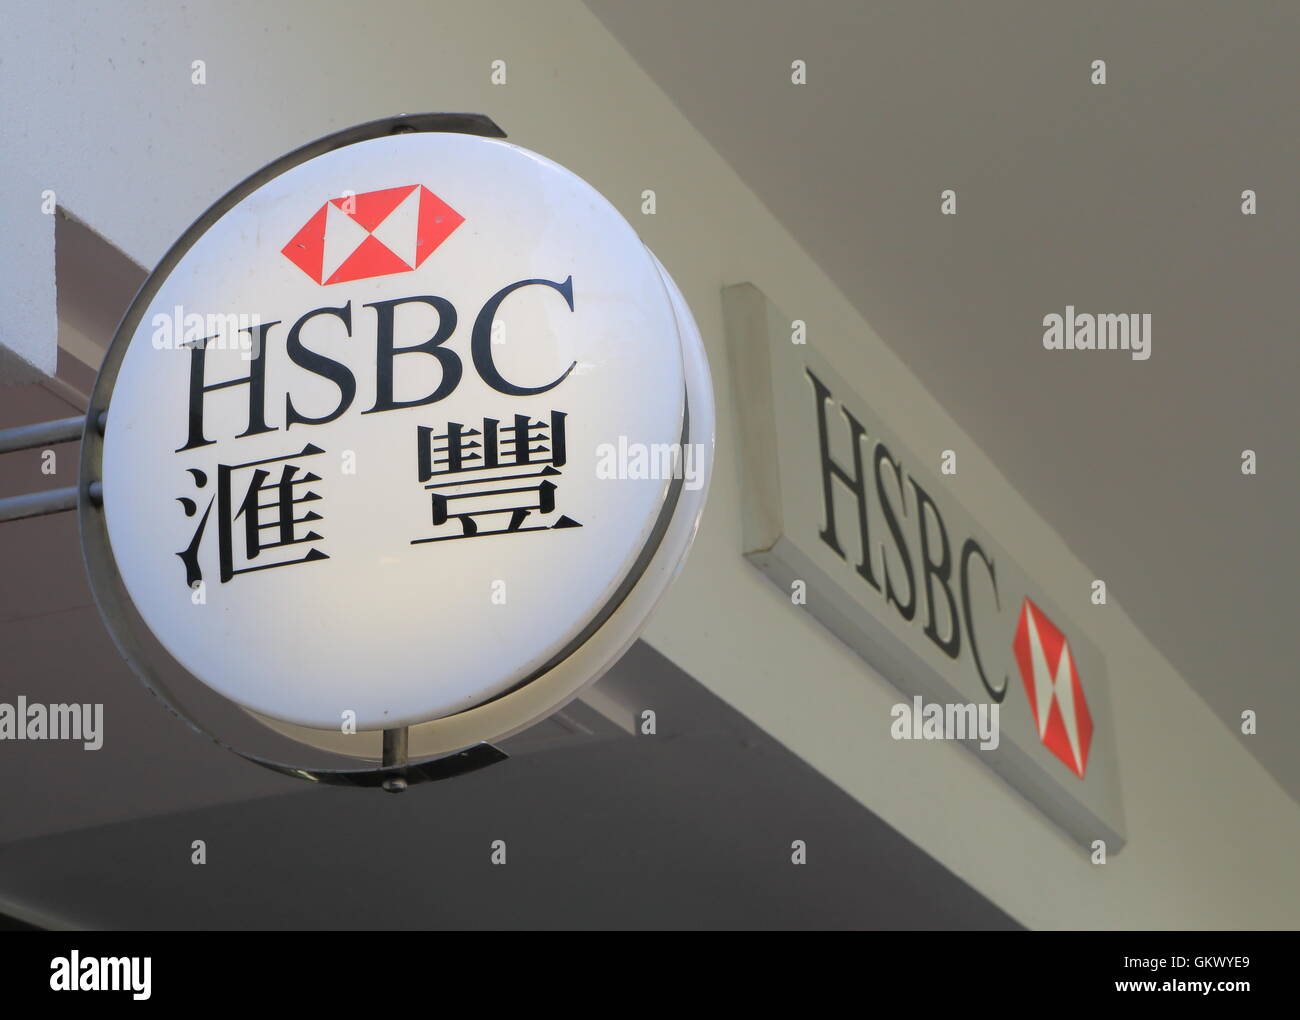 HSBC bank logo, British multinational banking and financial services and headquartered in London. Stock Photo